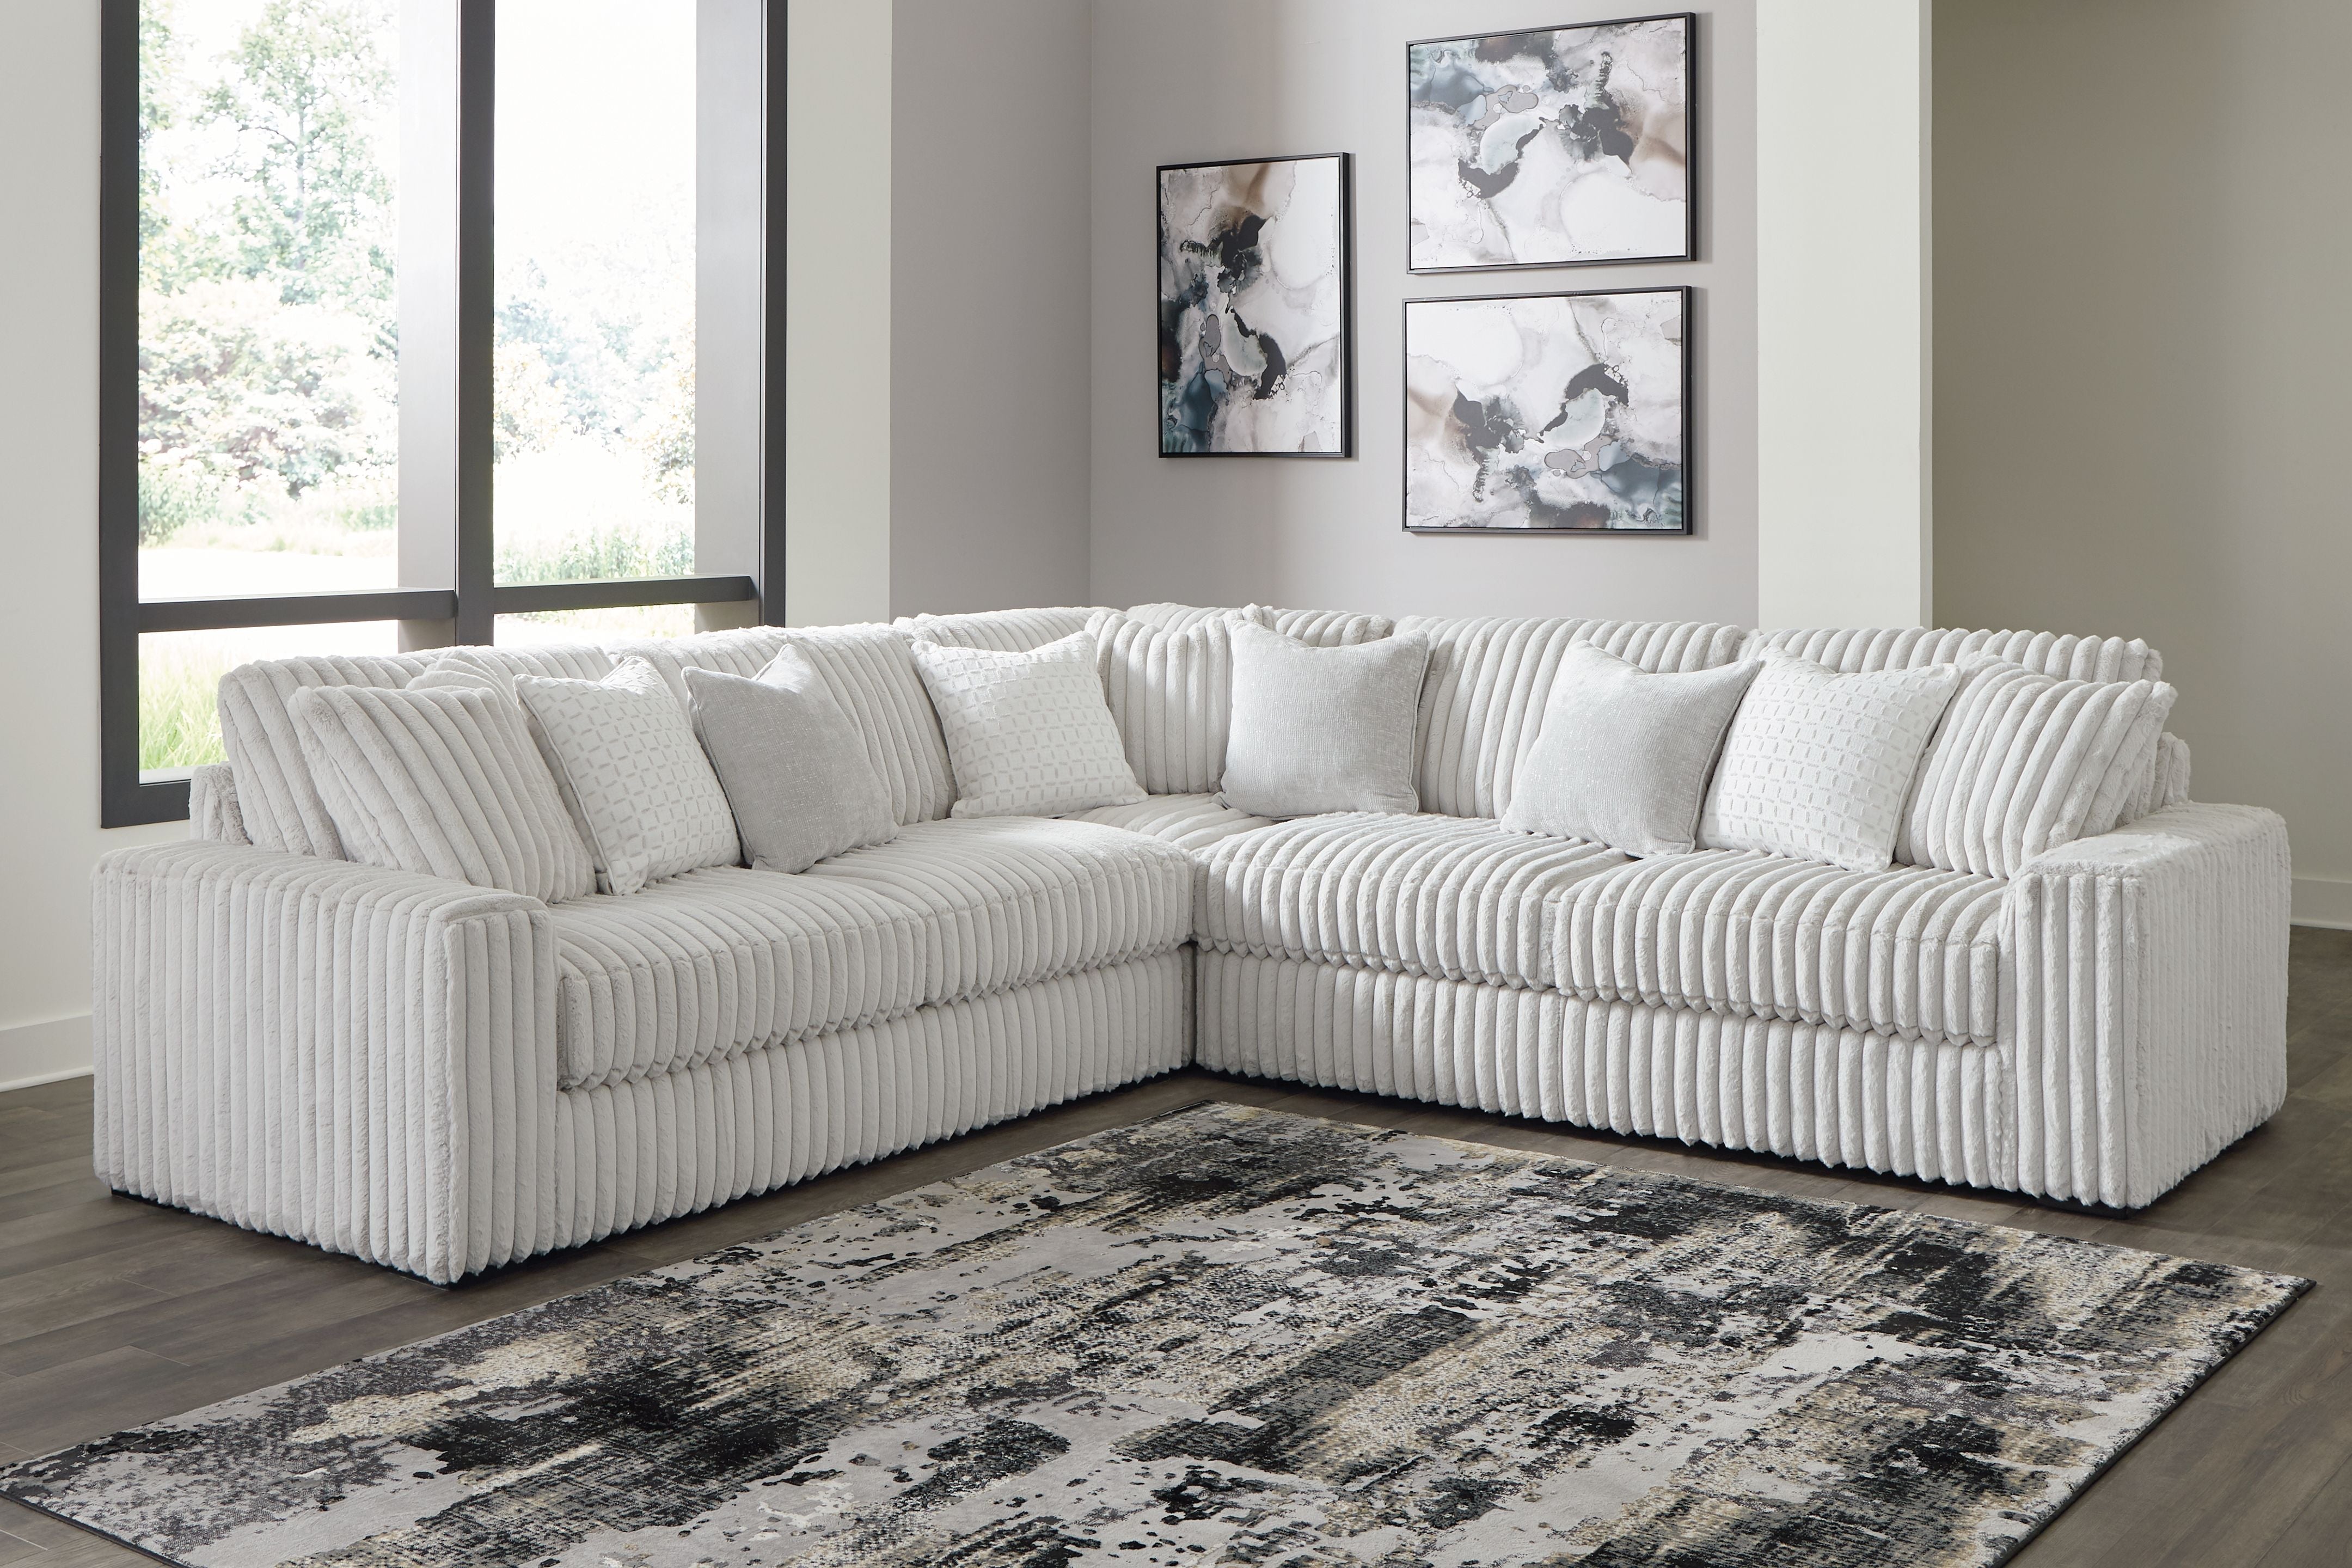 Stupendous Sectional Alloy - Retro Corduroy, Feather-Blend Cushions, Comfy-Stationary Sectionals-American Furniture Outlet